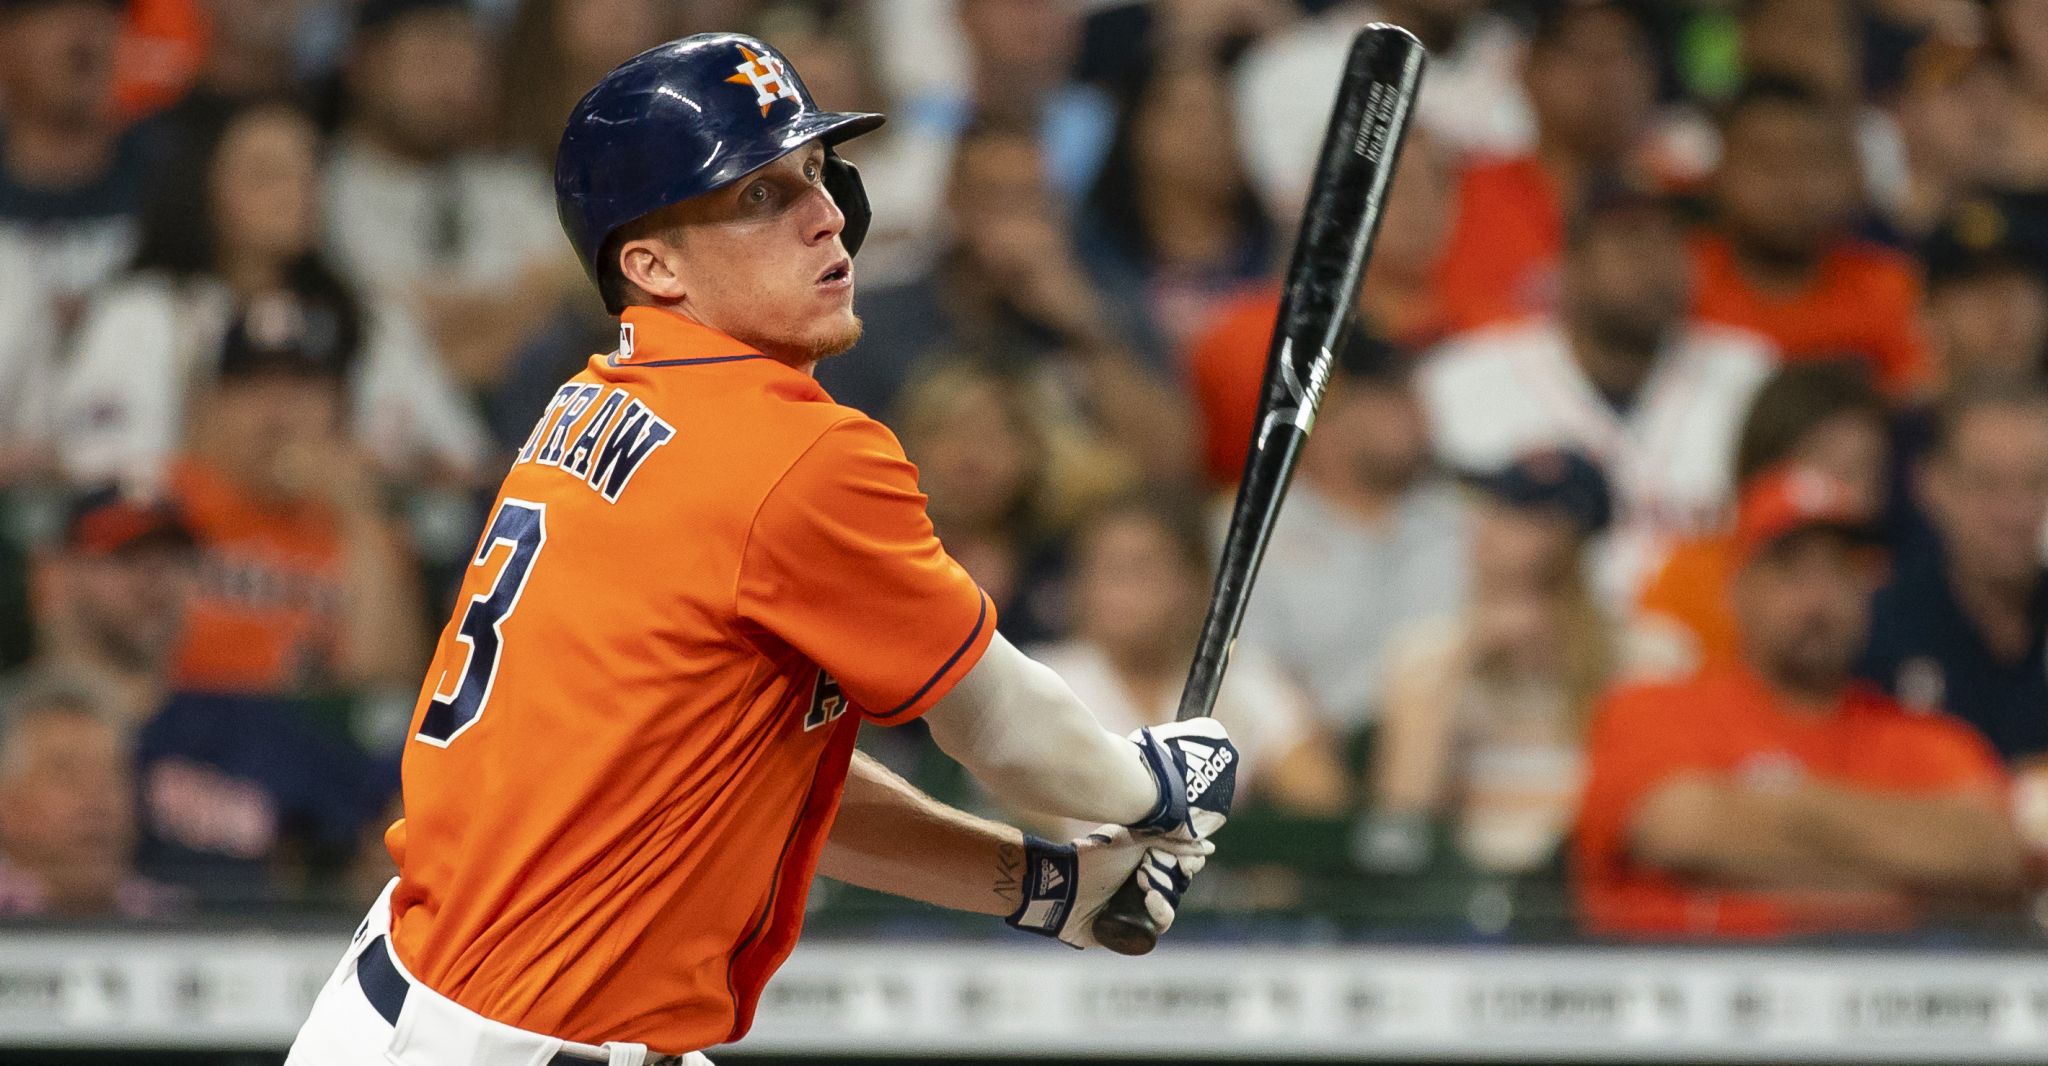 Indians acquire OF Straw from Astros for RHP Maton